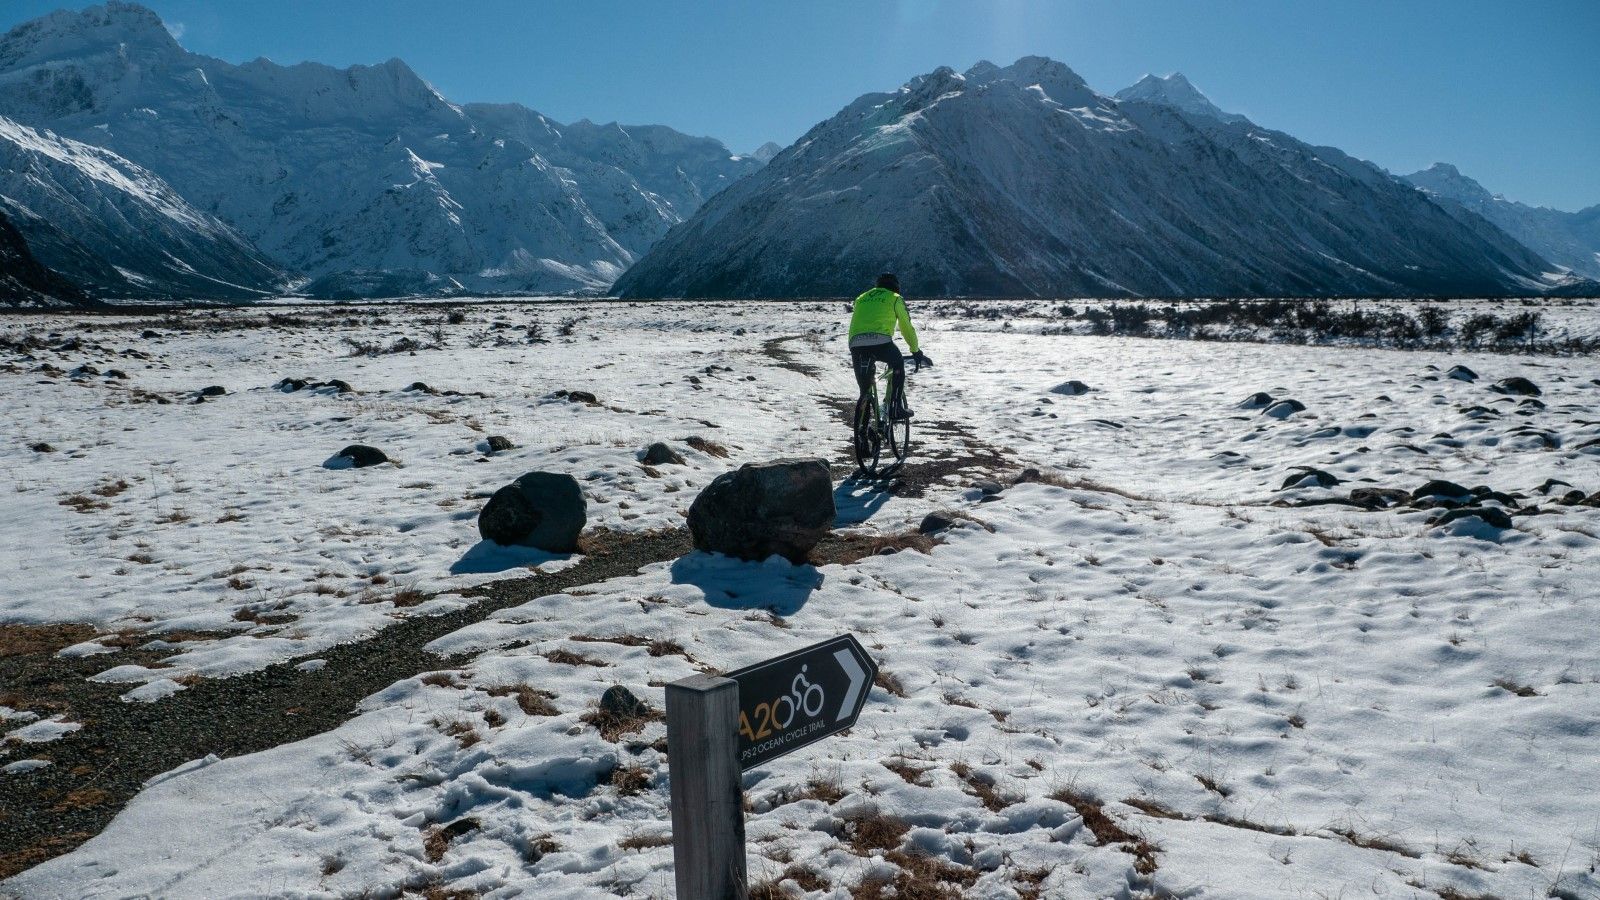 Alps 2 Ocean Cycle Trail - Mt Cook banner image